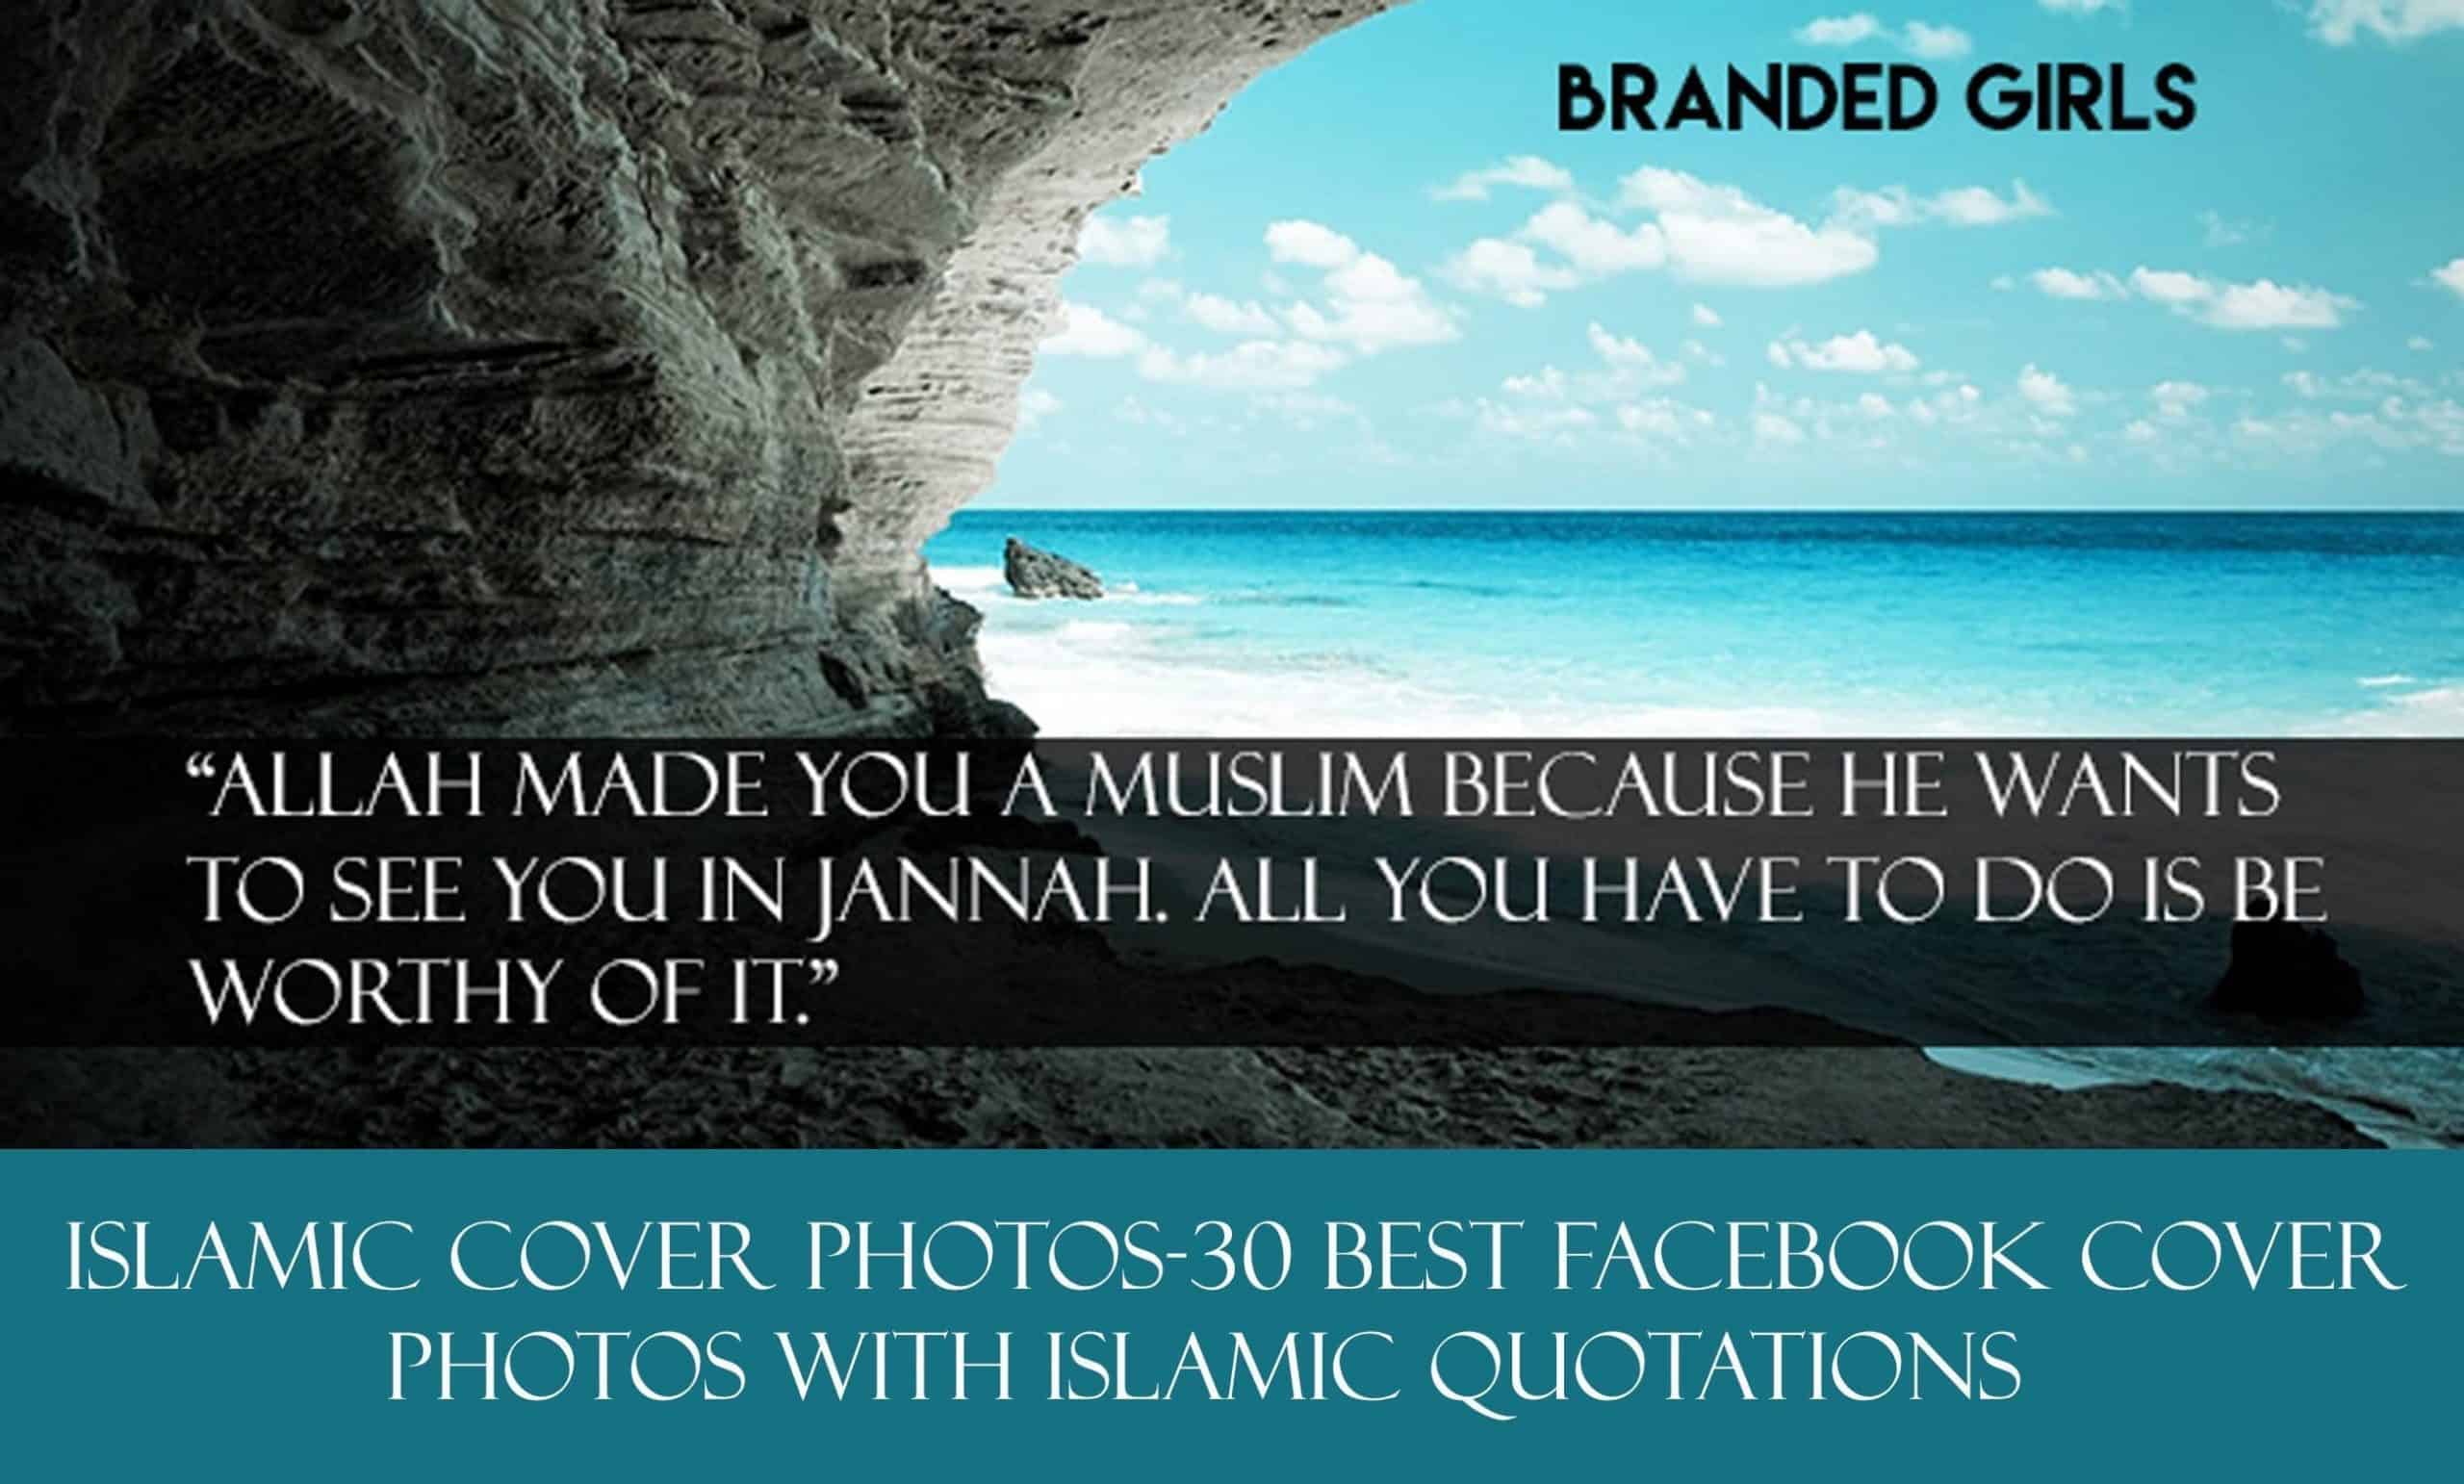 Islamic Cover Photos-30 Best Facebook Covers Photos with Quotations